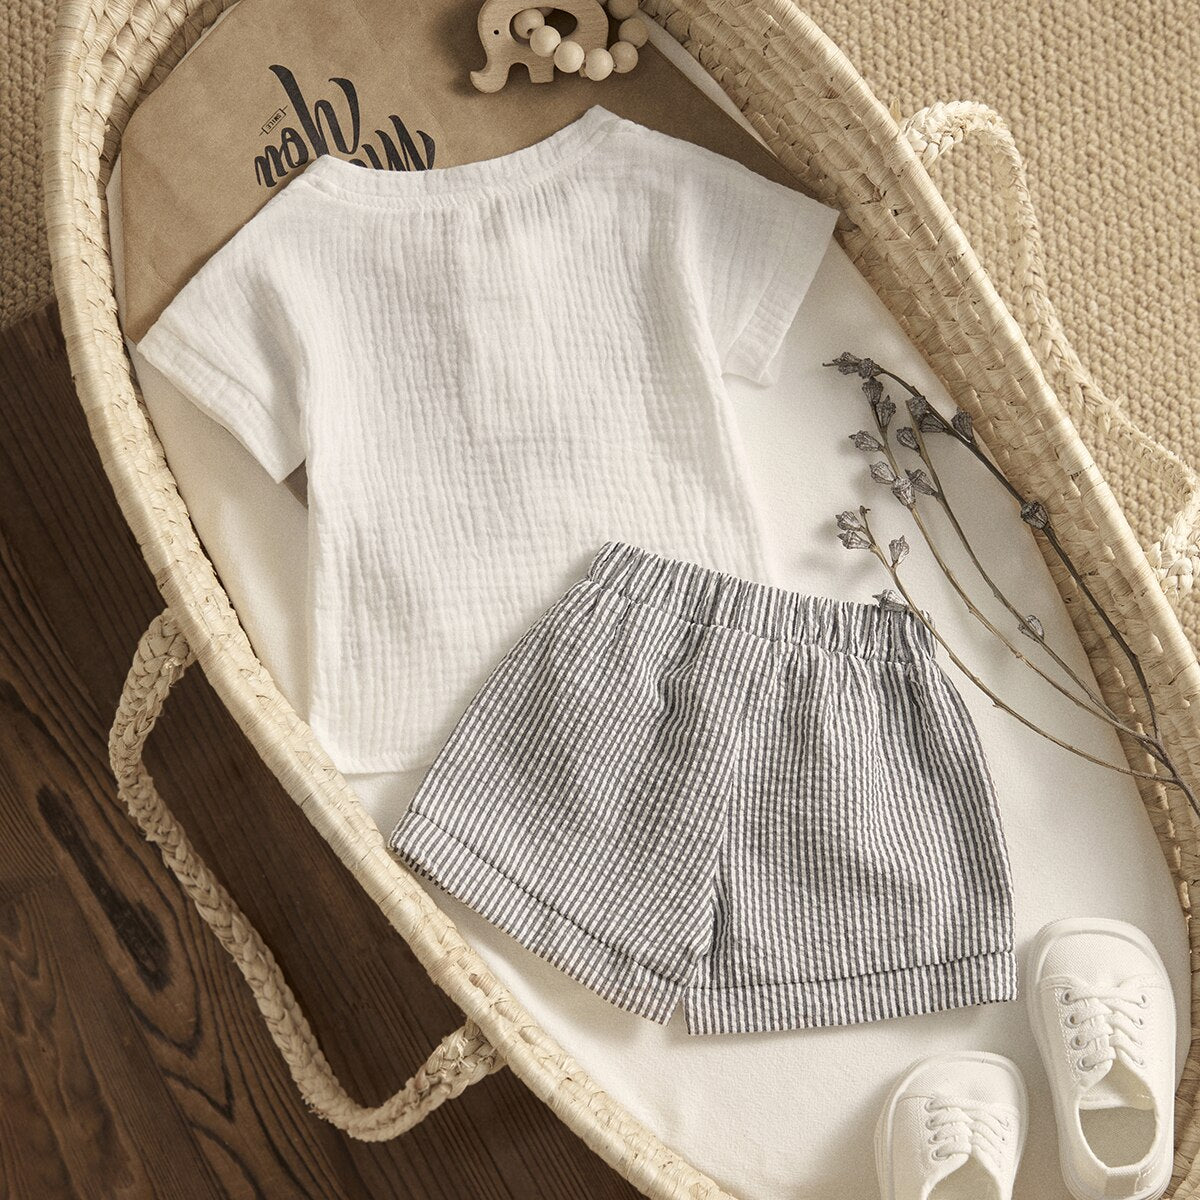 ma&baby 0-3Y Toddler Infant Kid Baby Boy Clothes Sets Soft Short Sleeve T-shirt Tops Striped Shorts Summer Outifts Clothing